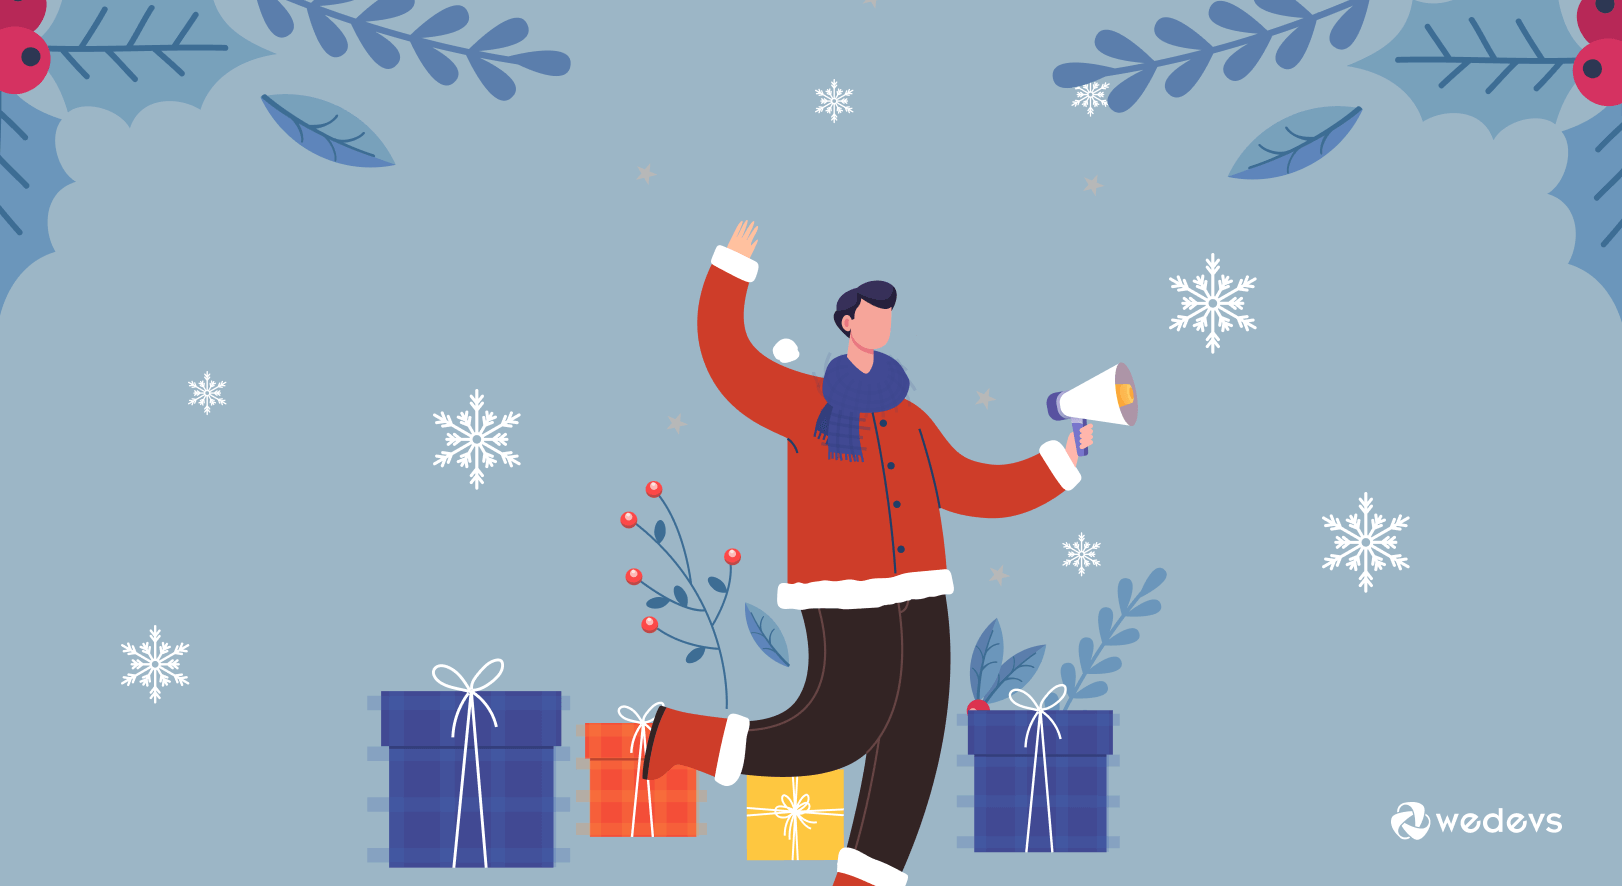 10+ Exclusive Christmas Marketing Ideas to Boost Your Sales